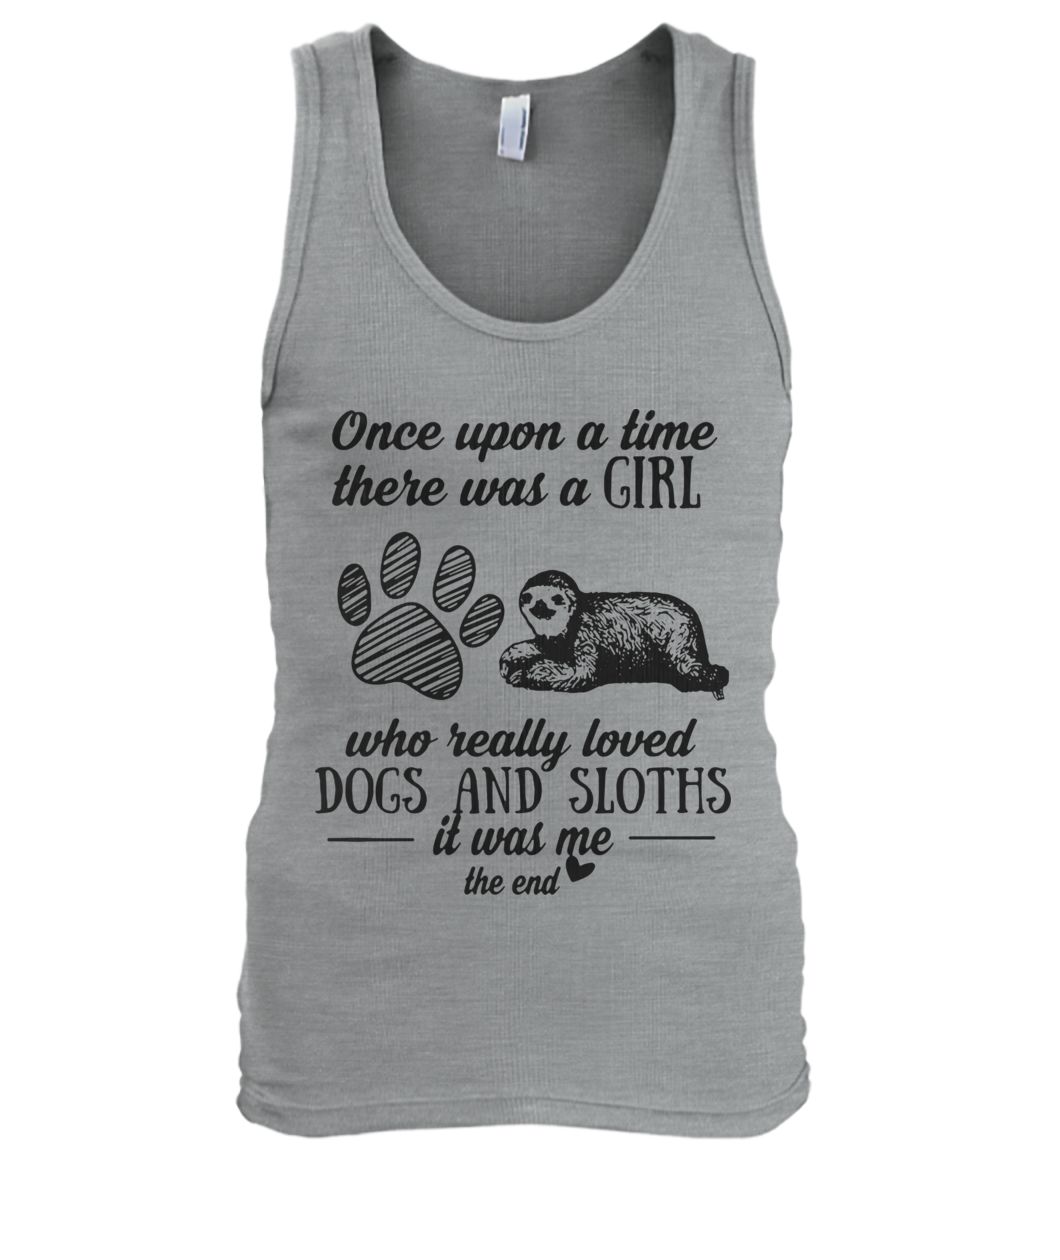 Once upon a time there was a girl who really loved dogs and sloths it was me men's tank top